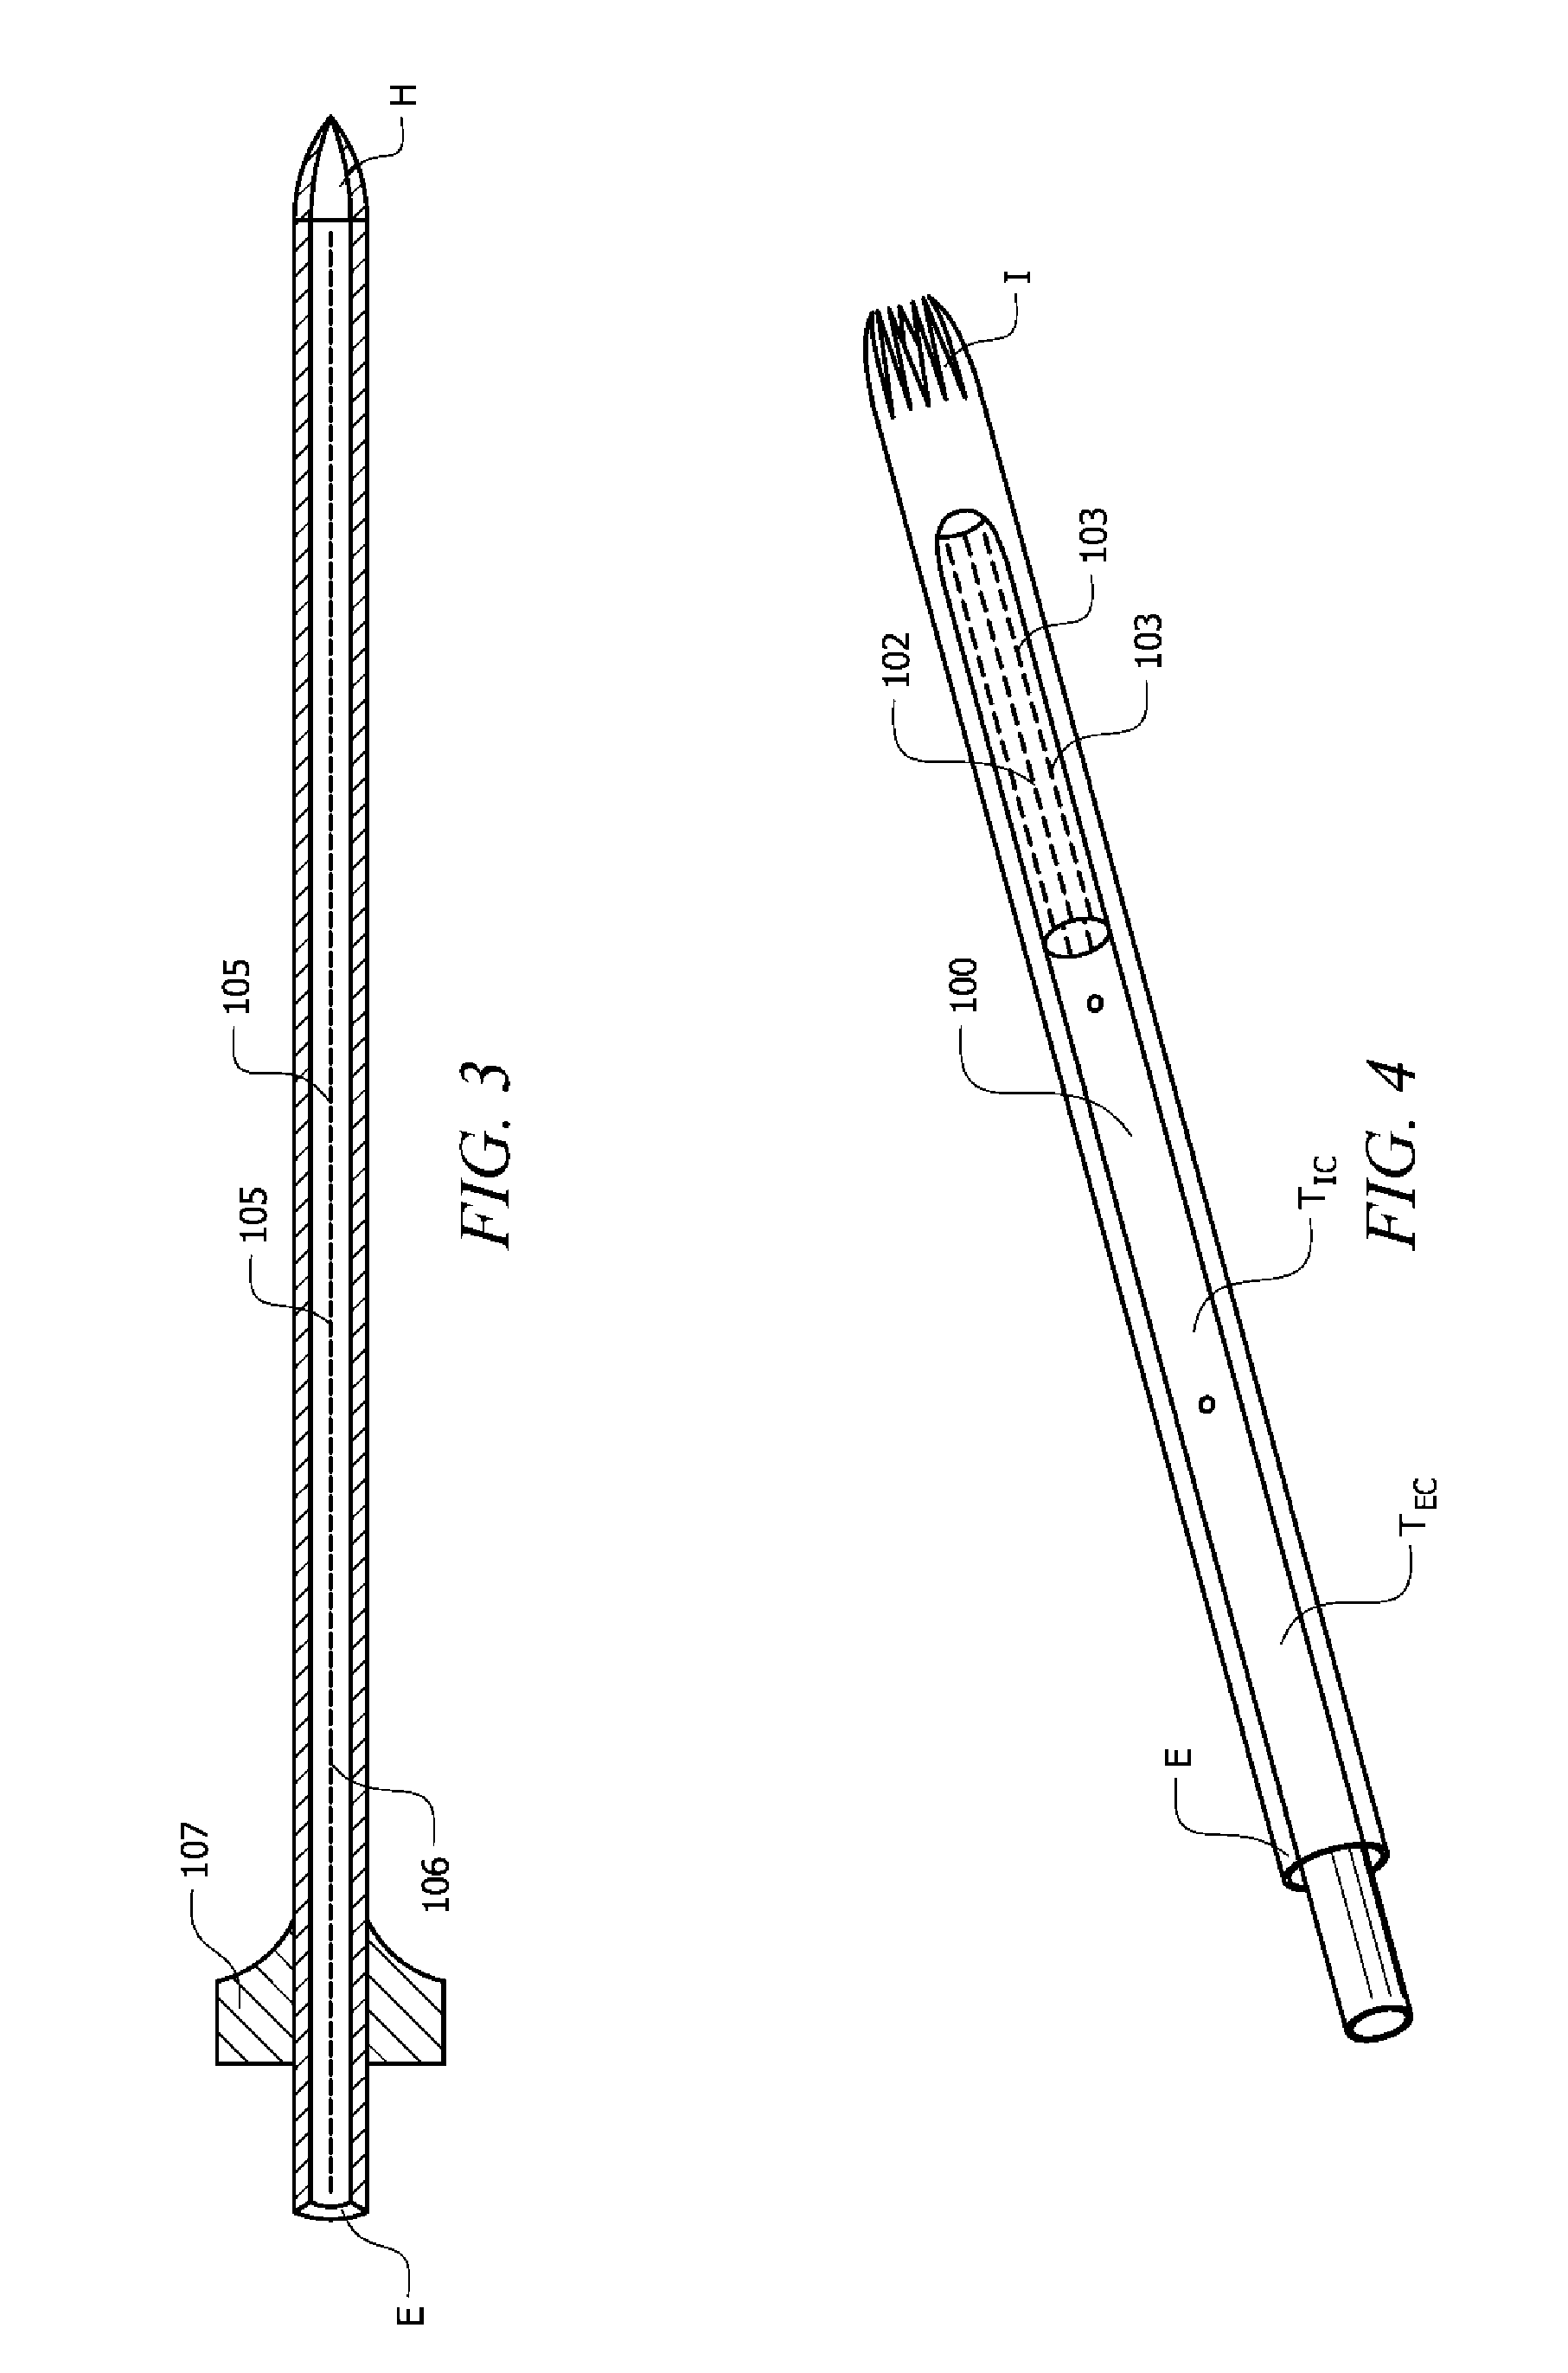 Anti-clogging ventricular catheter for cerebrospinal fluid drainage